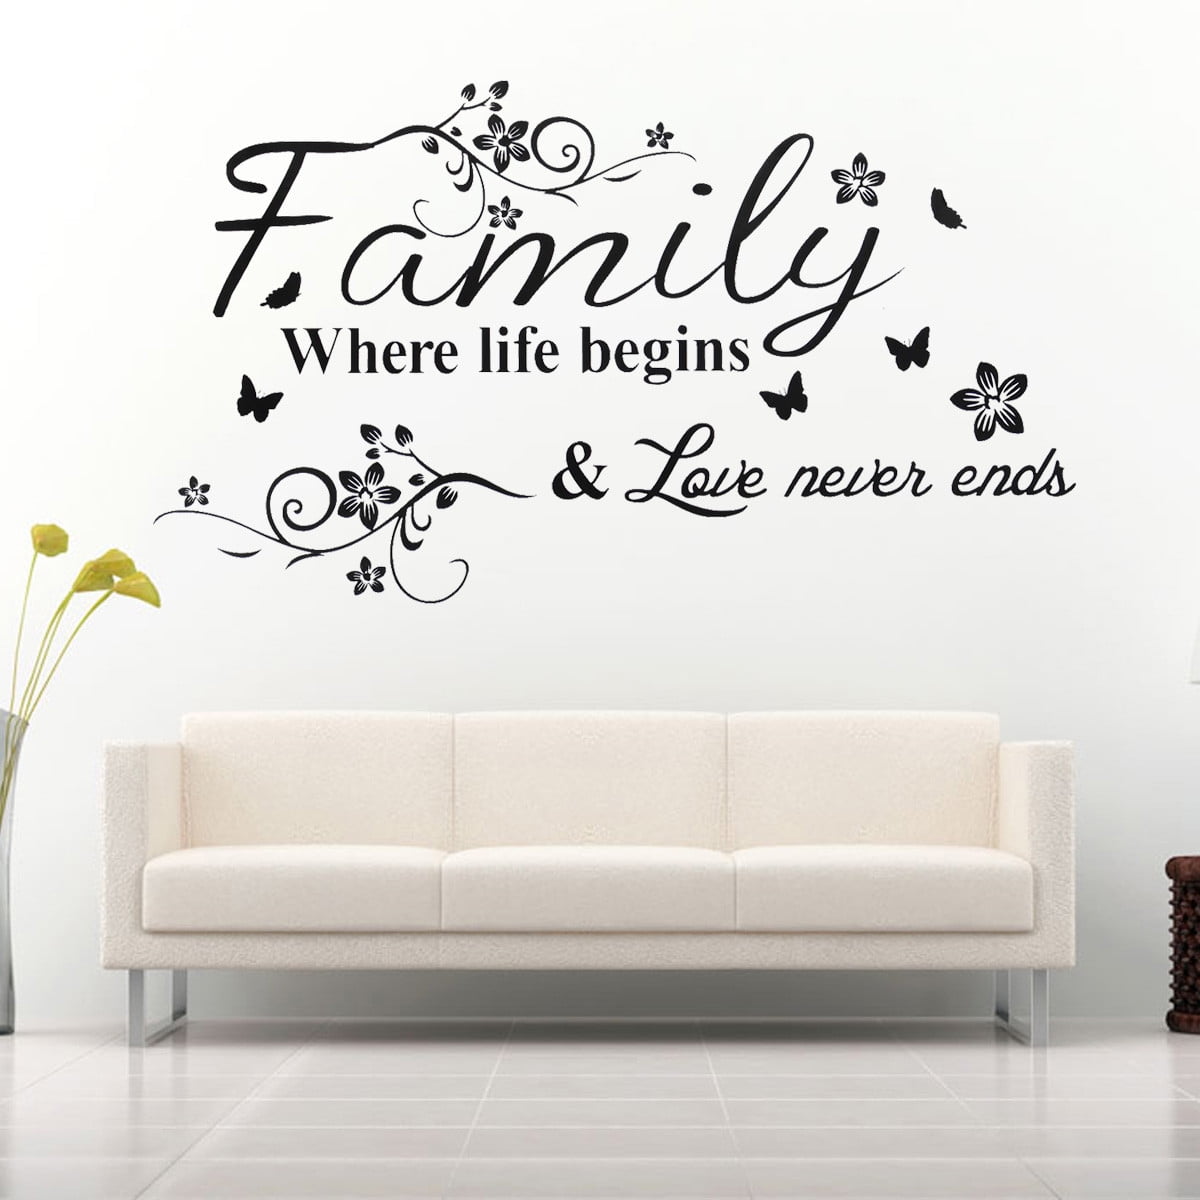 2 Sheets Family is Everything Wall Decal with Enjoy The Little Things Vinyl Wall Decor Inspiration Wall Art Sayings Vinyl Sticker Decor of Living Room Home Decor 